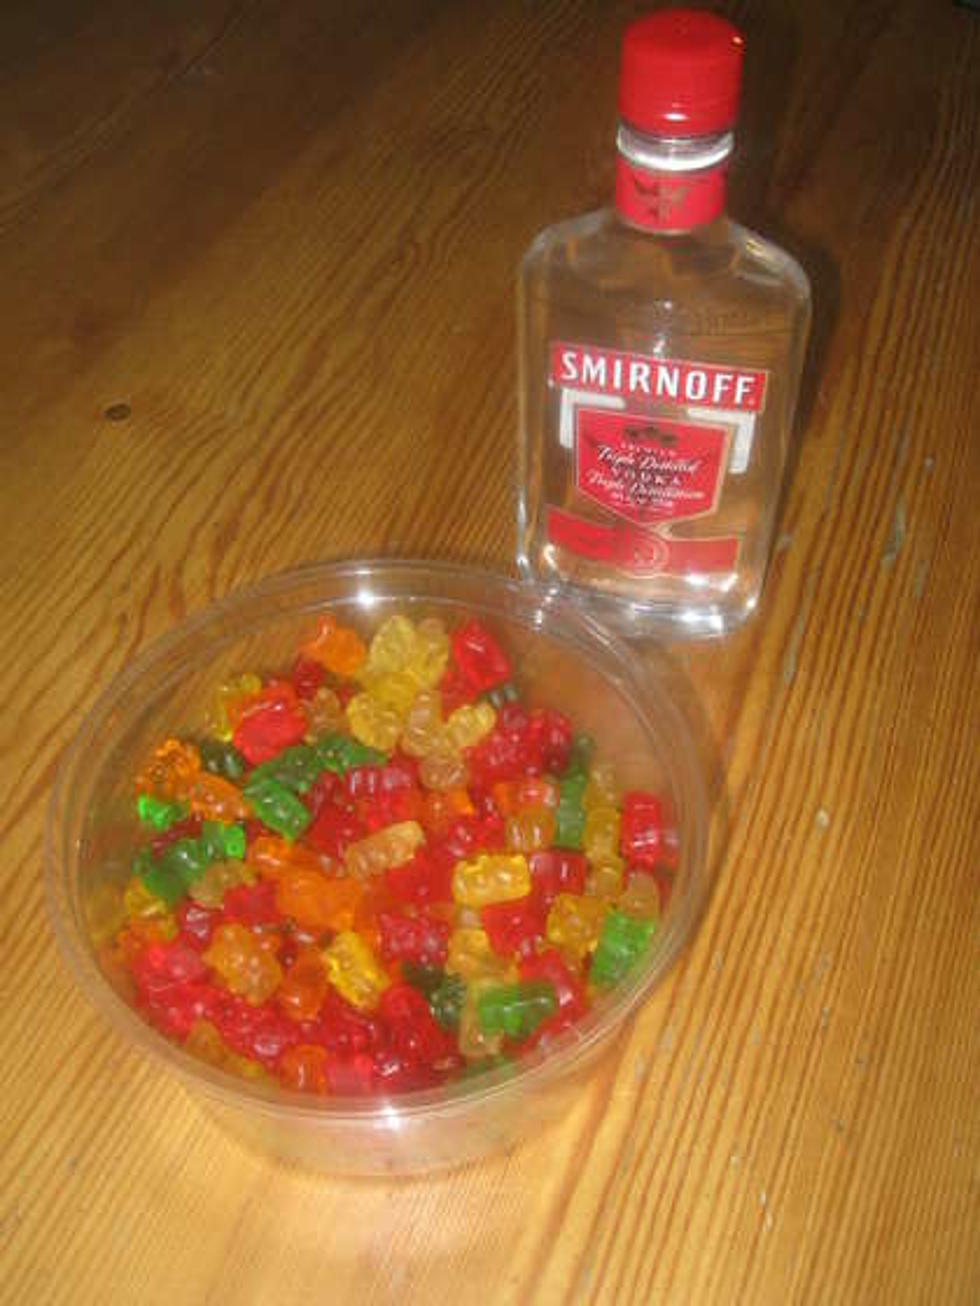 School Districts Warn Teachers And Parents To Look For ‘Drunk Gummies’ [VIDEO]